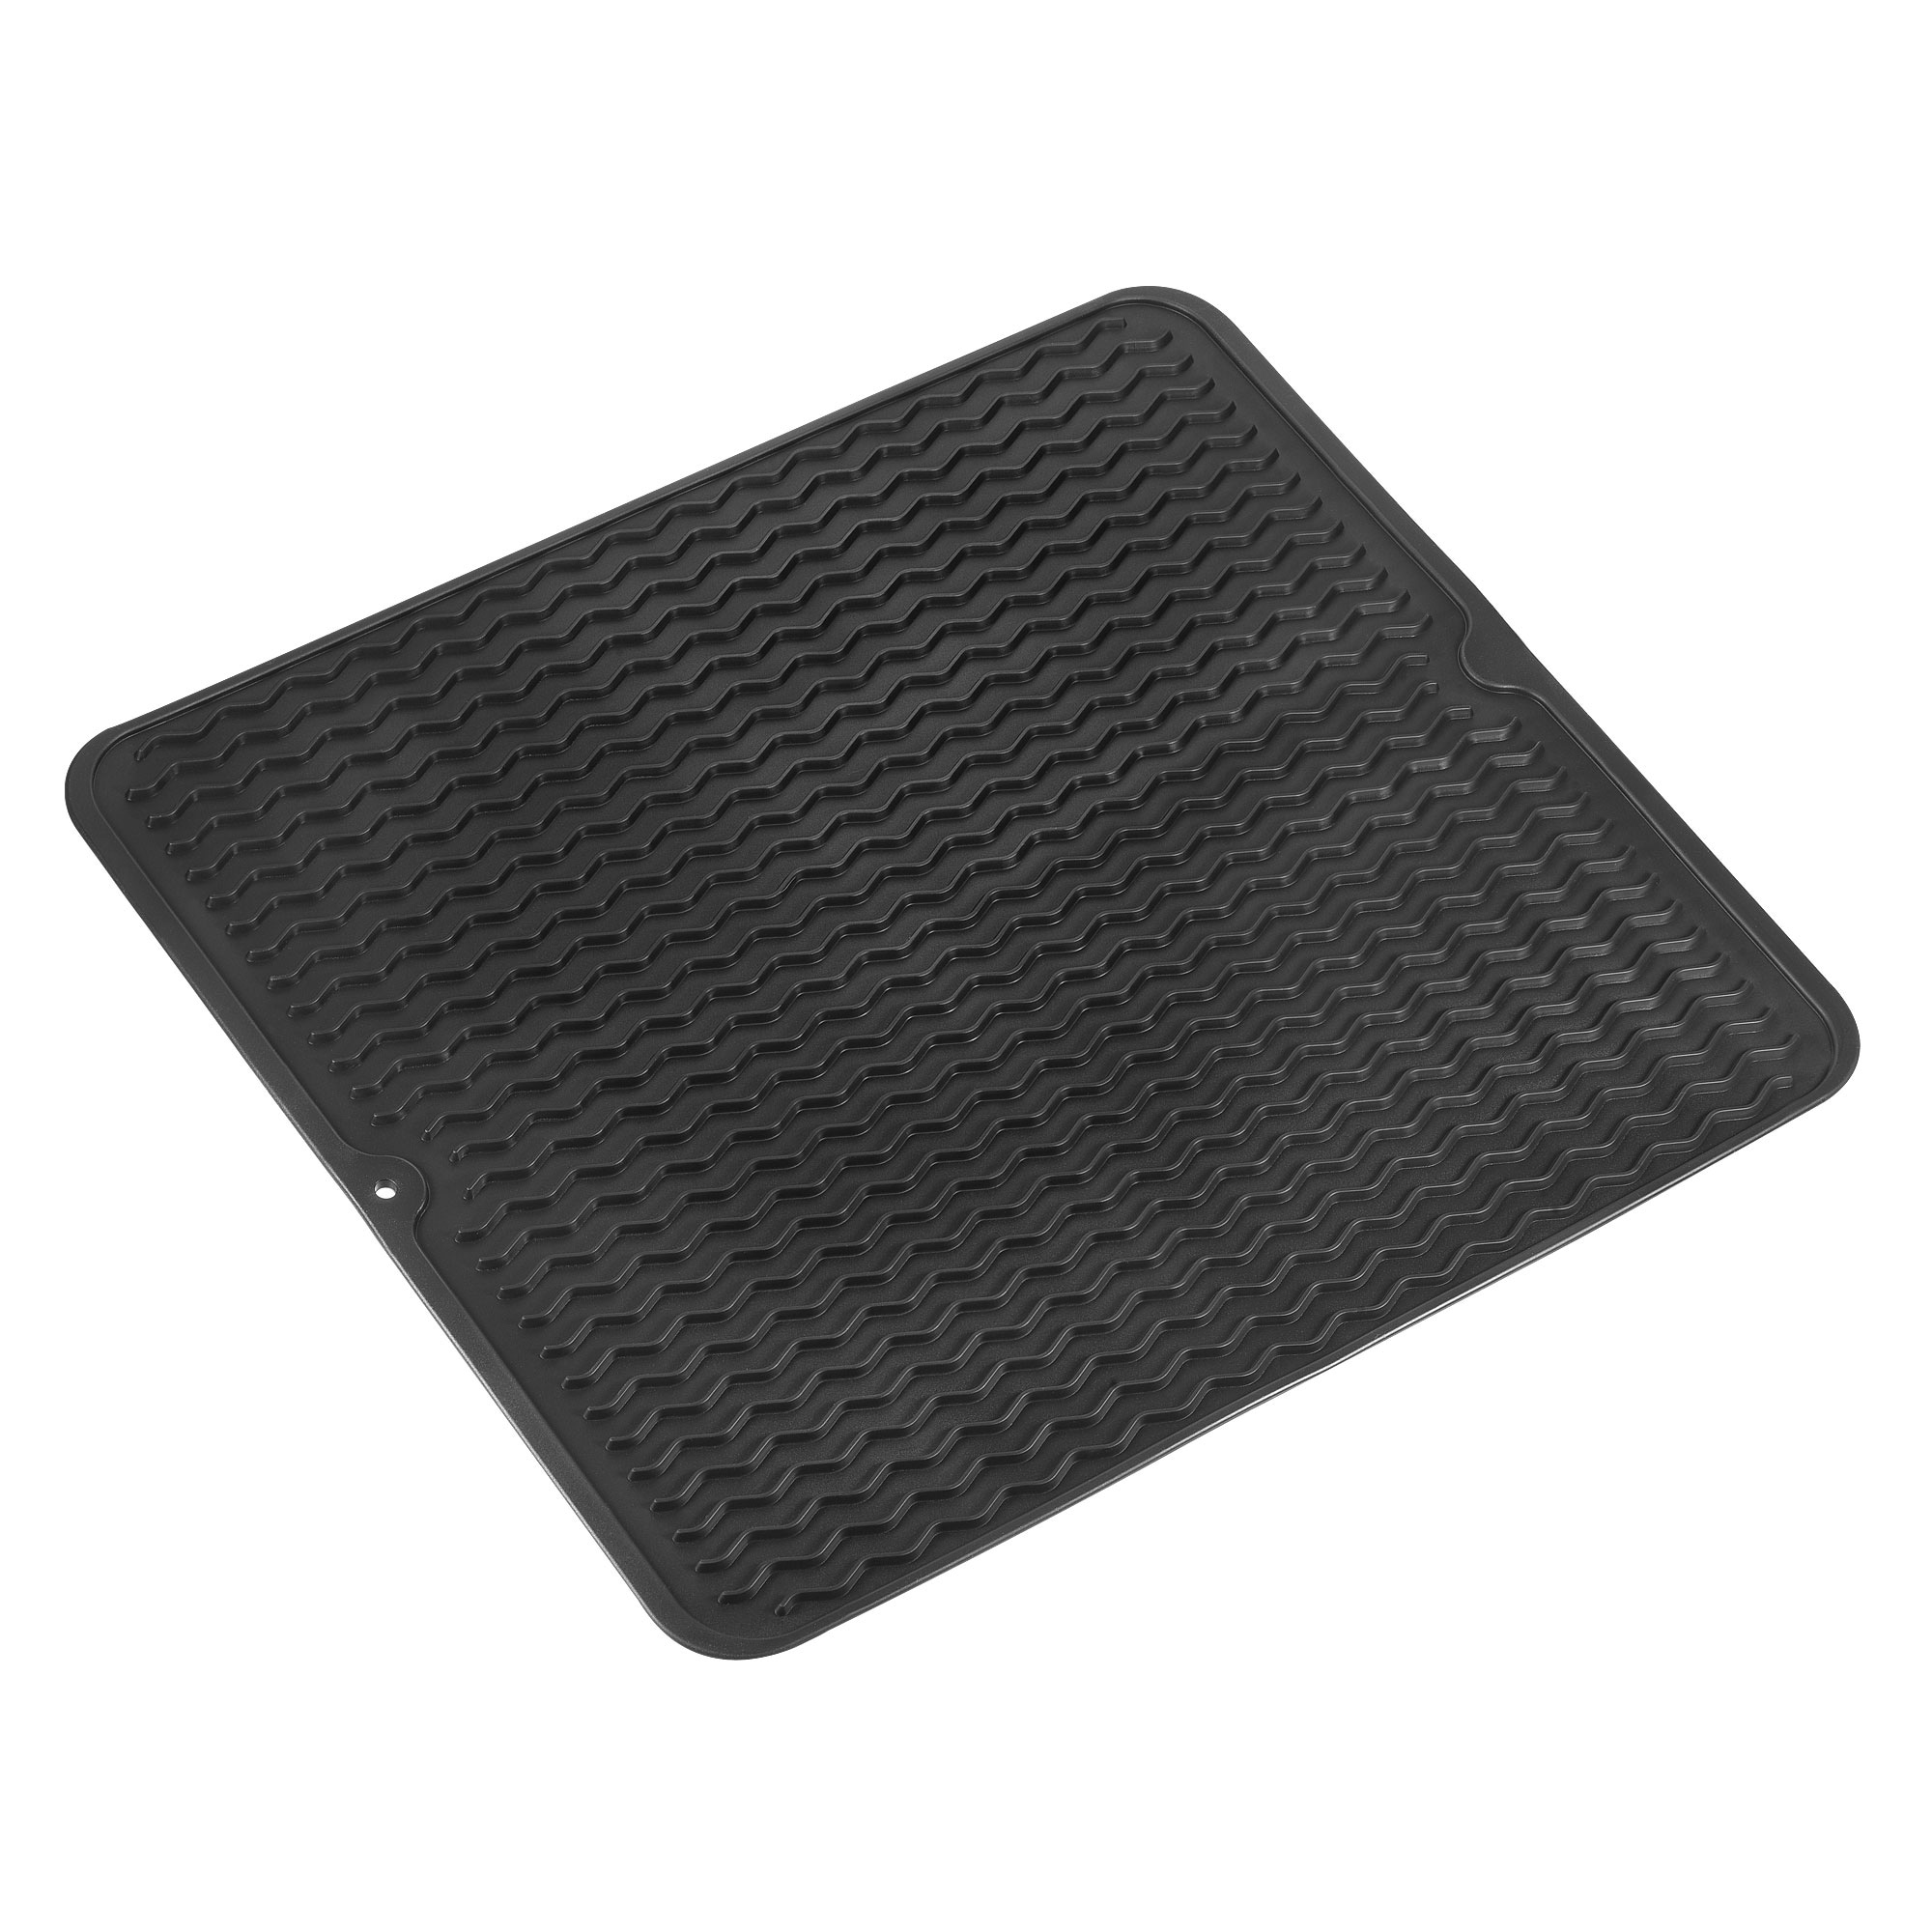 https://ak1.ostkcdn.com/images/products/is/images/direct/0da9cf280f5adf6dd6d4485d83098f809dc6660d/Silicone-Dish-Drying-Mat-Drainer-Rack-Holder-Kitchen-Pad-Tray-Rippled.jpg